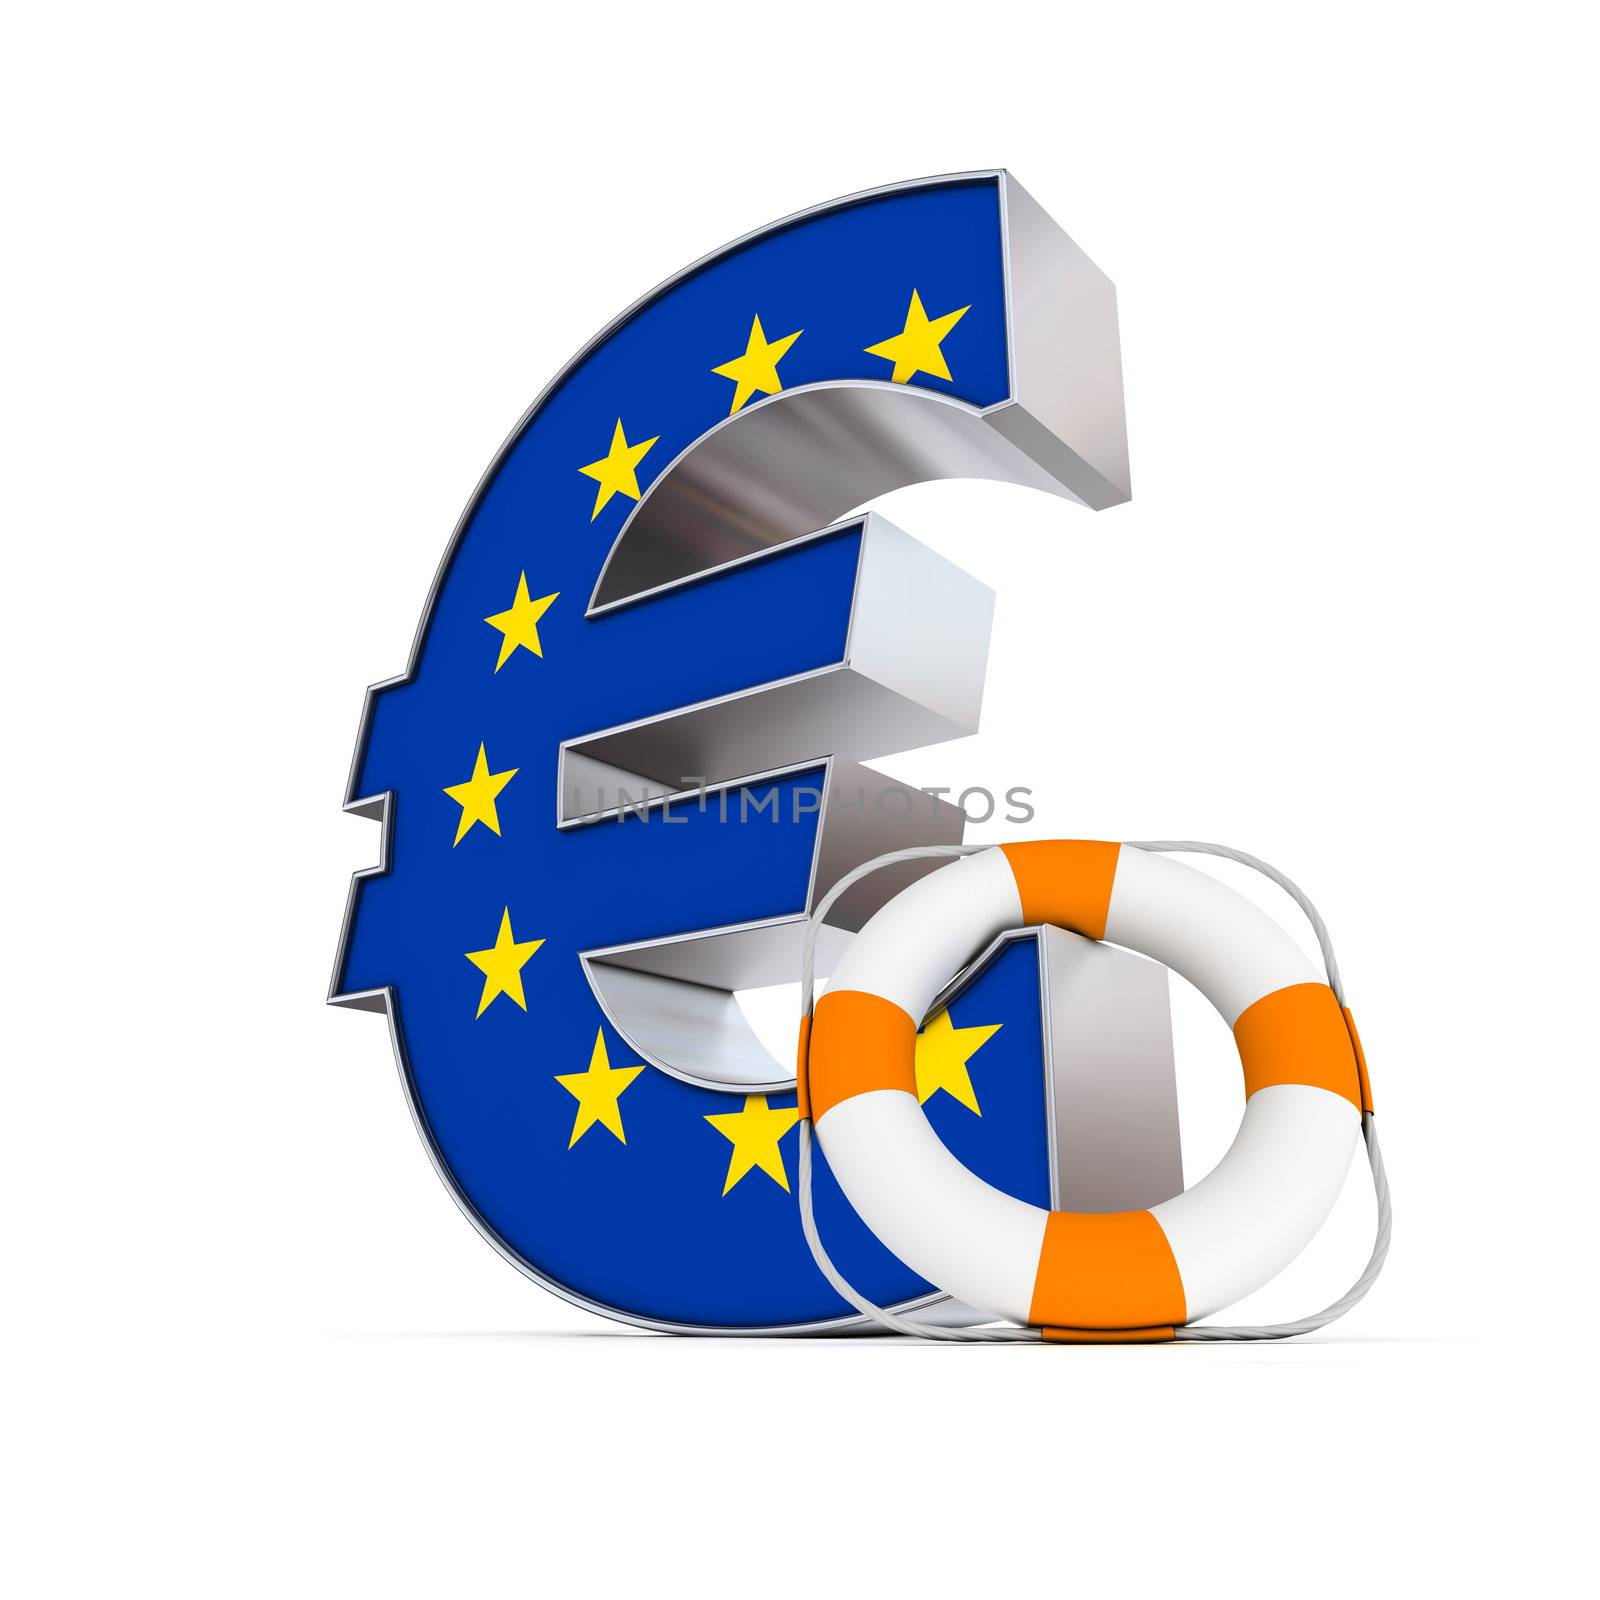 white and orange lifebelt leans on a shiny metallic Euro currency symbol - symbol front is textured with the flag of the European Union